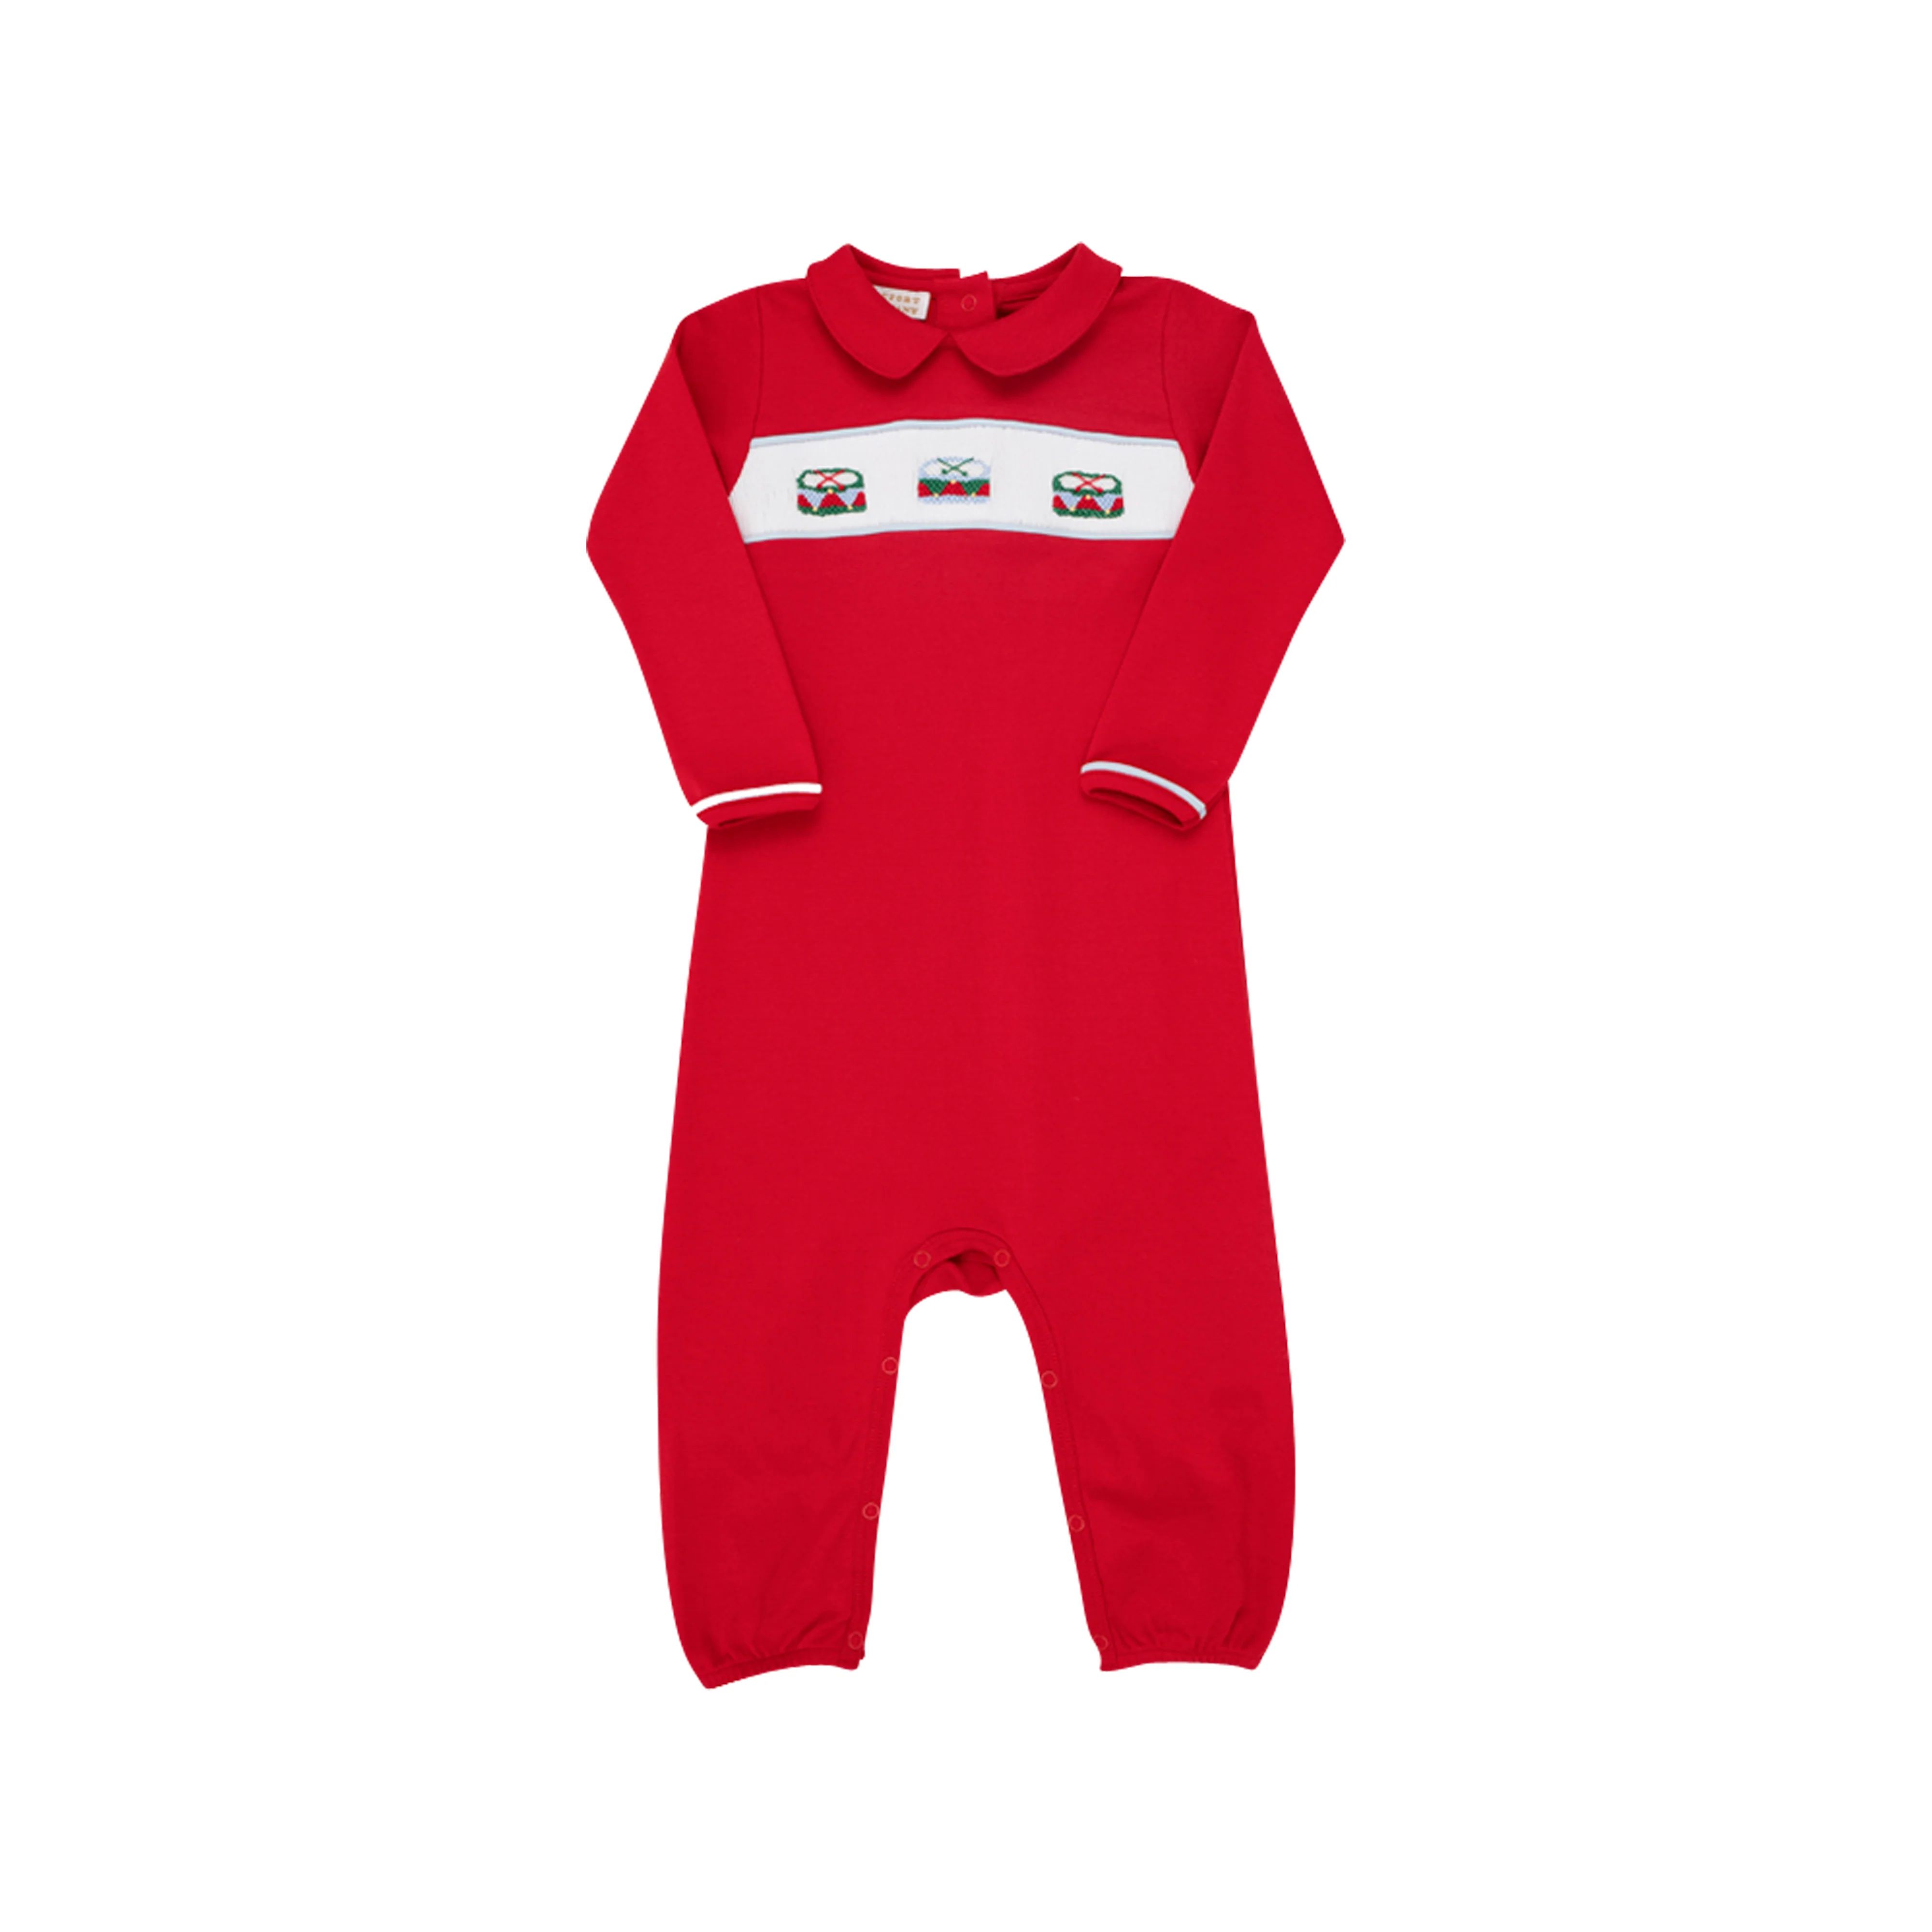 Rigsby Romper - Richmond Red with Buckhead Blue & Drum Smocking | The Beaufort Bonnet Company